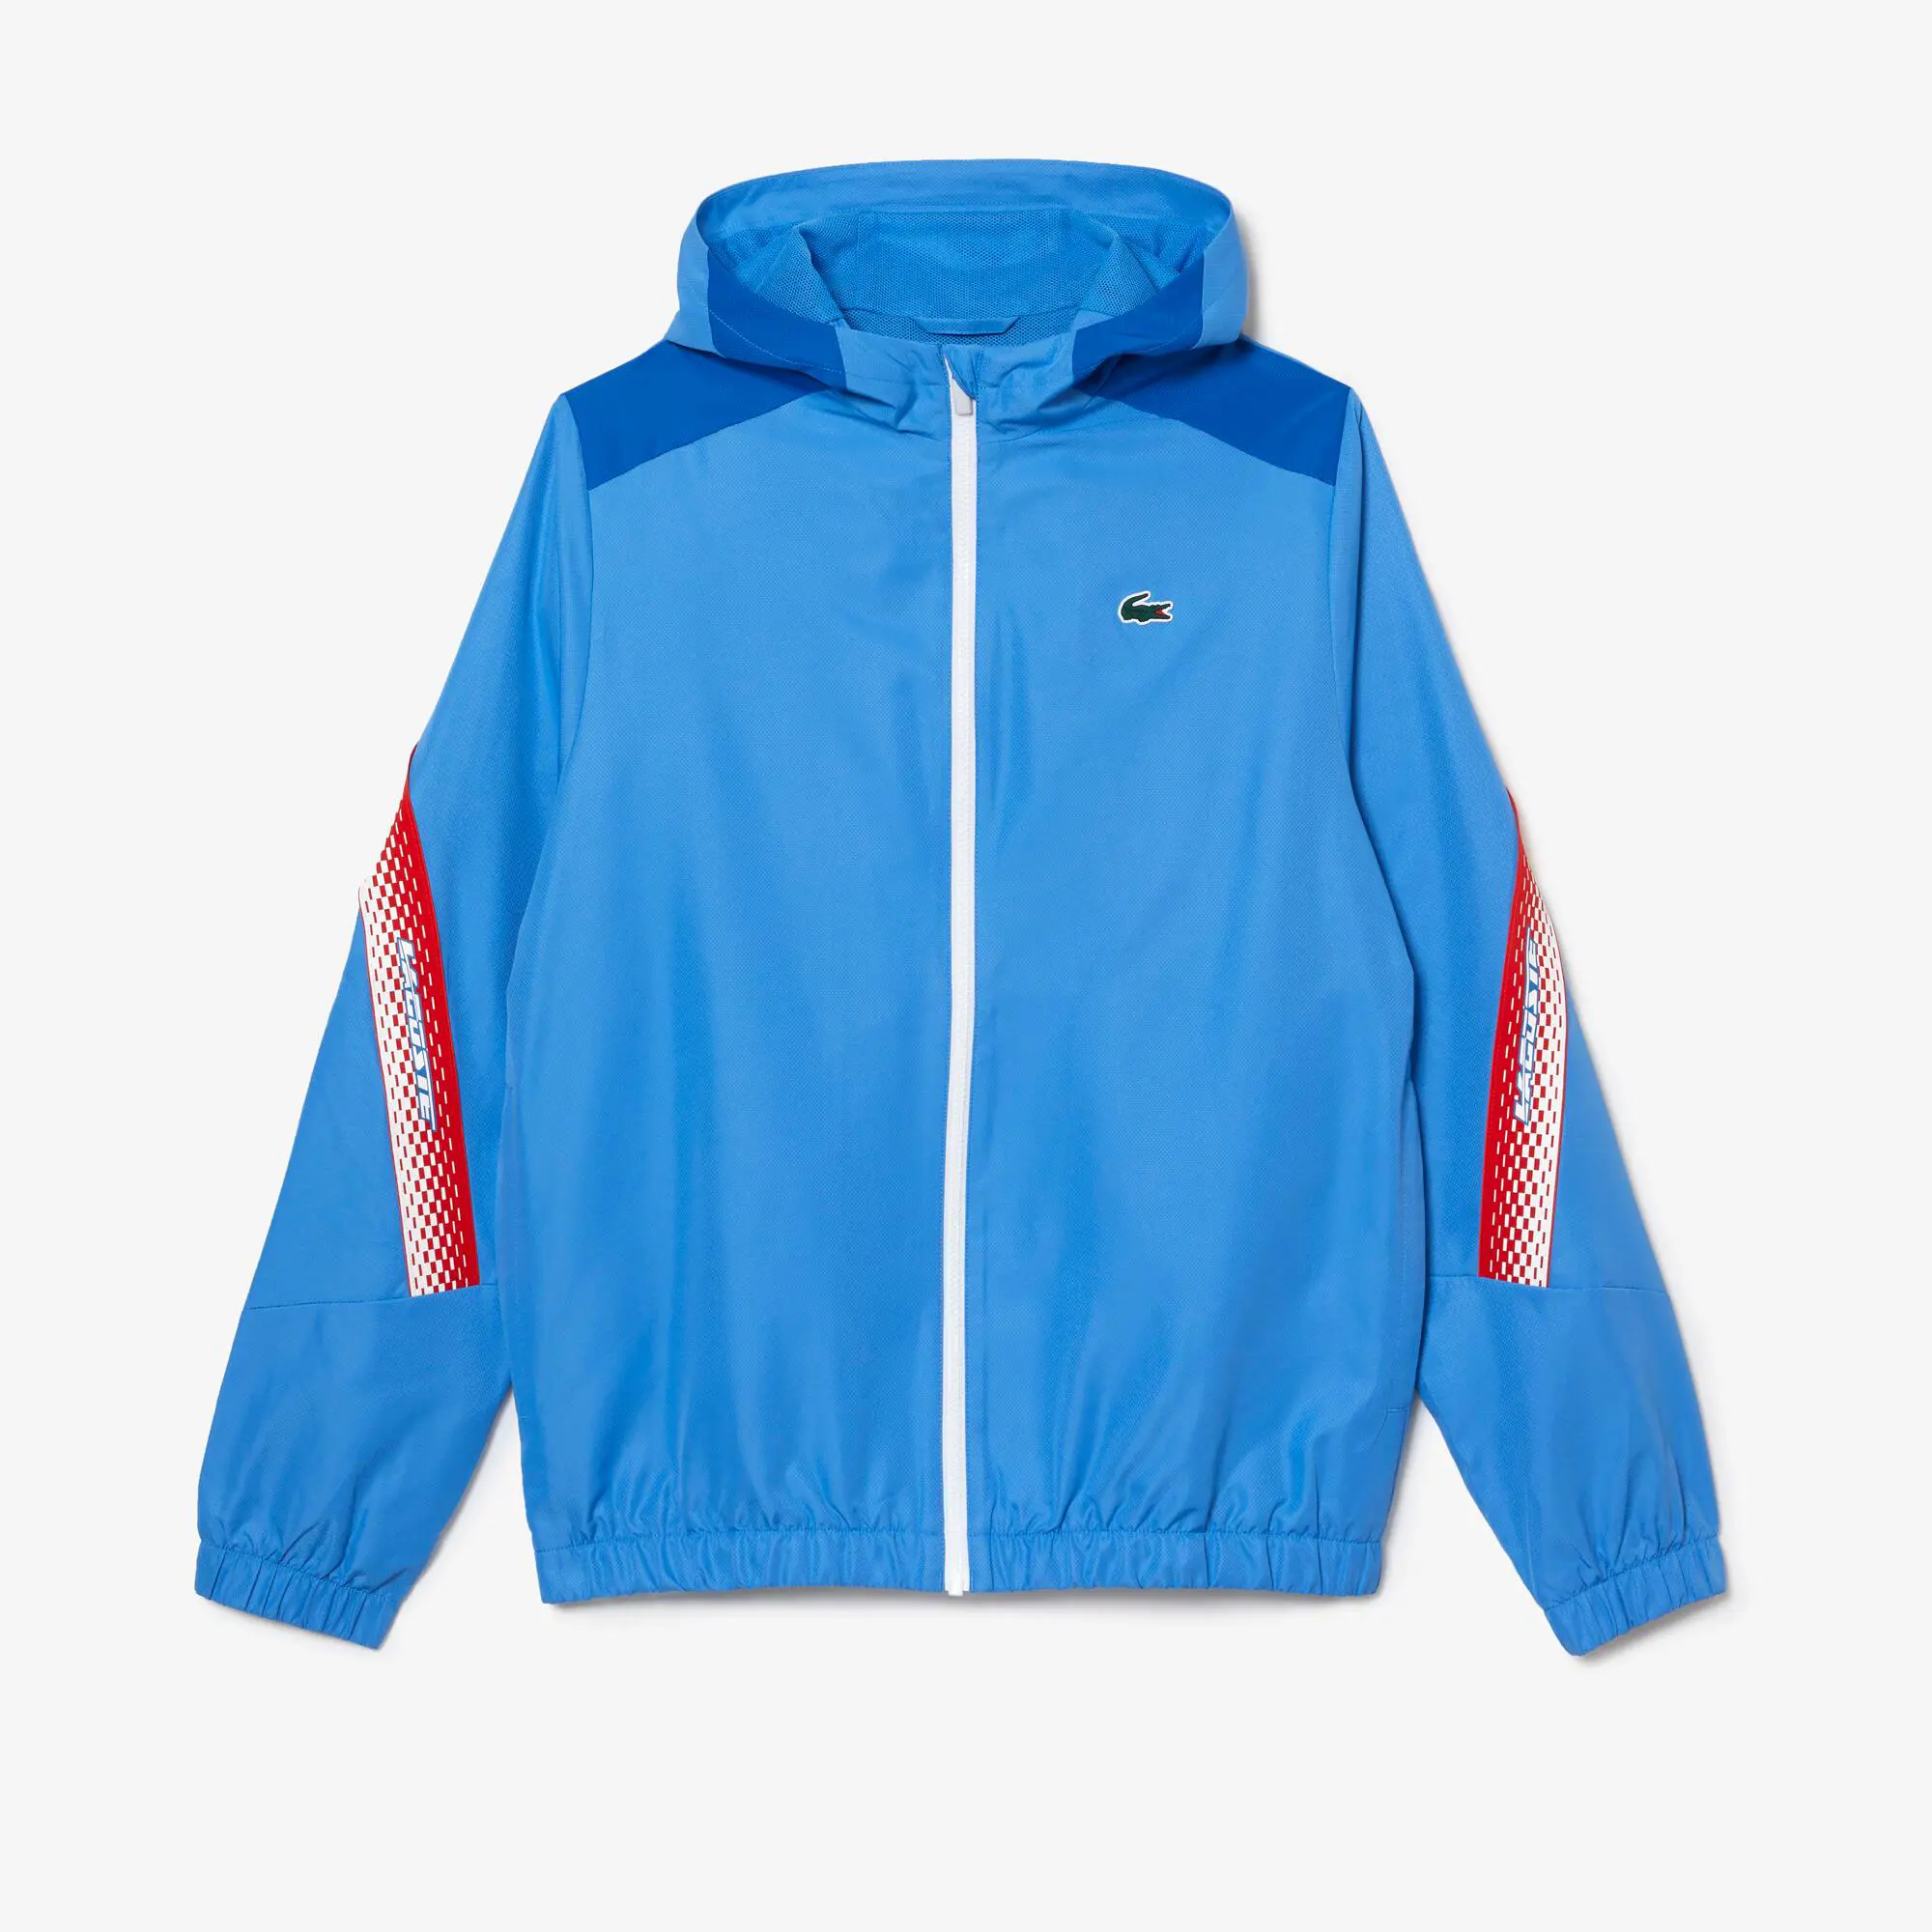 Lacoste Men’s Lacoste Tennis Recycled Polyester Hooded Jacket. 2